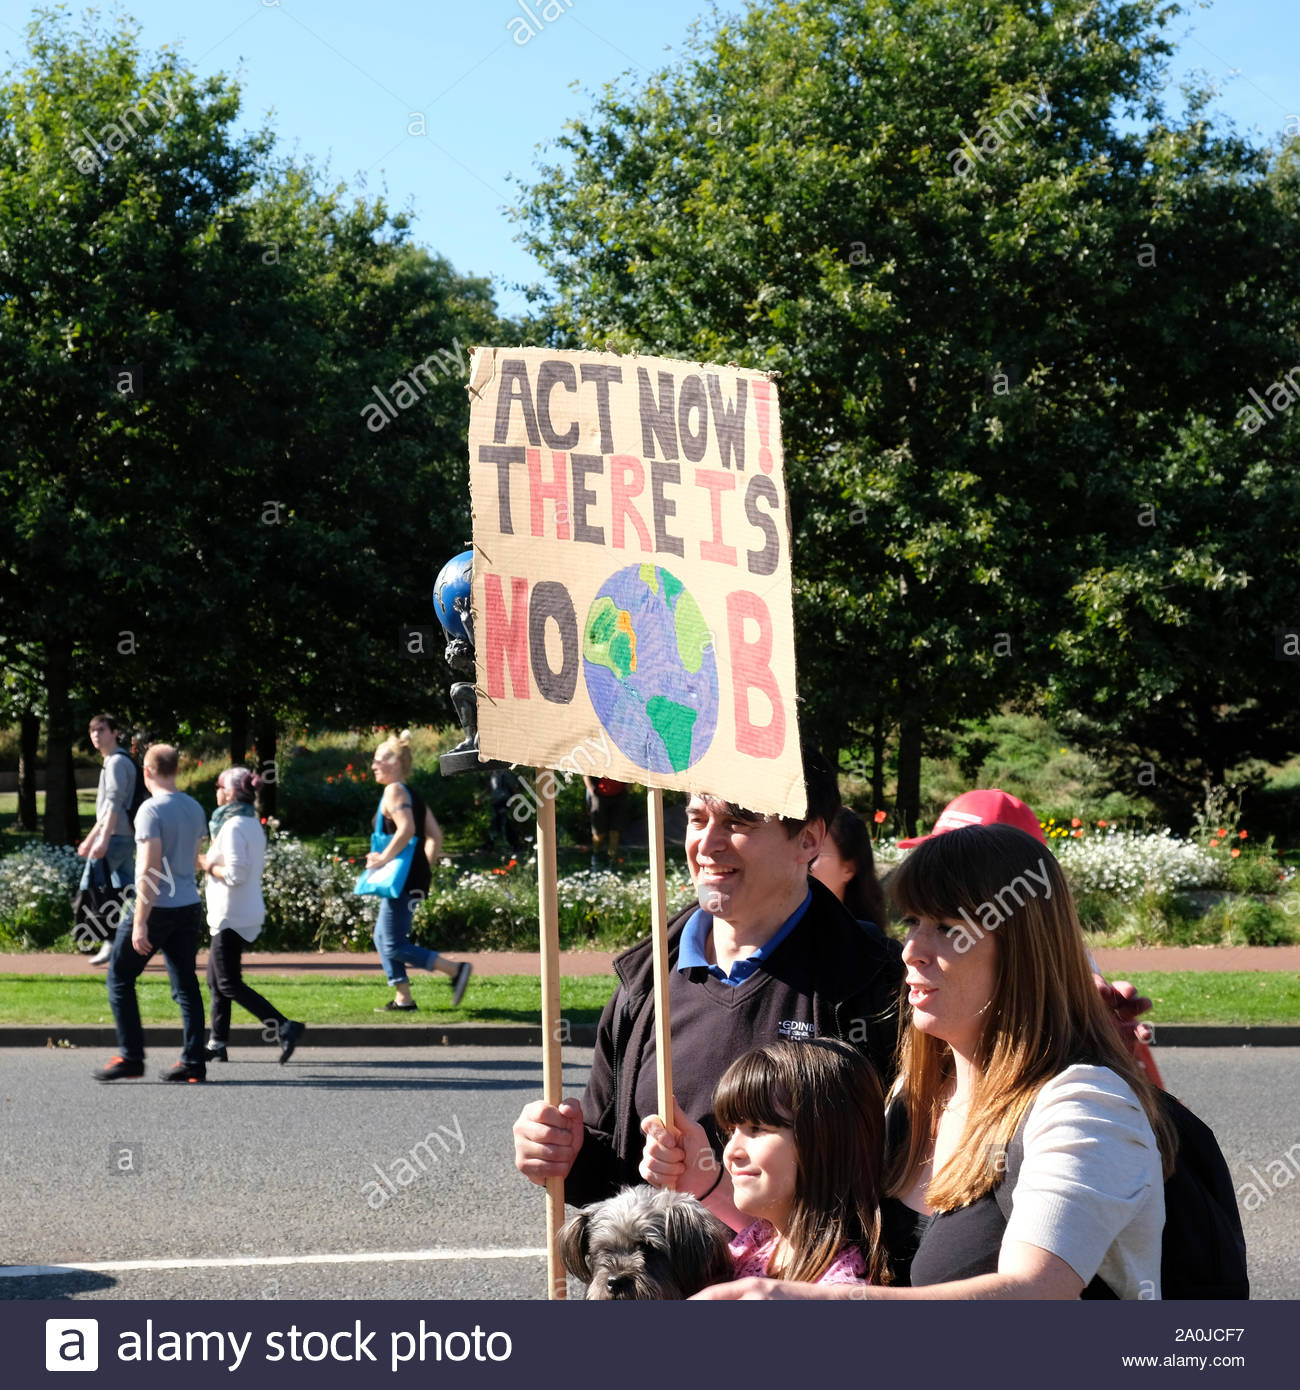 Edinburgh, Scotland, UK. 20th September 2019.  A youth led Global Climate Strike Rally outside the Scottish parliament involving Edinburgh Students, demanding greater action on climate breakdown. Credit: Craig Brown/Alamy Live News Stock Photo